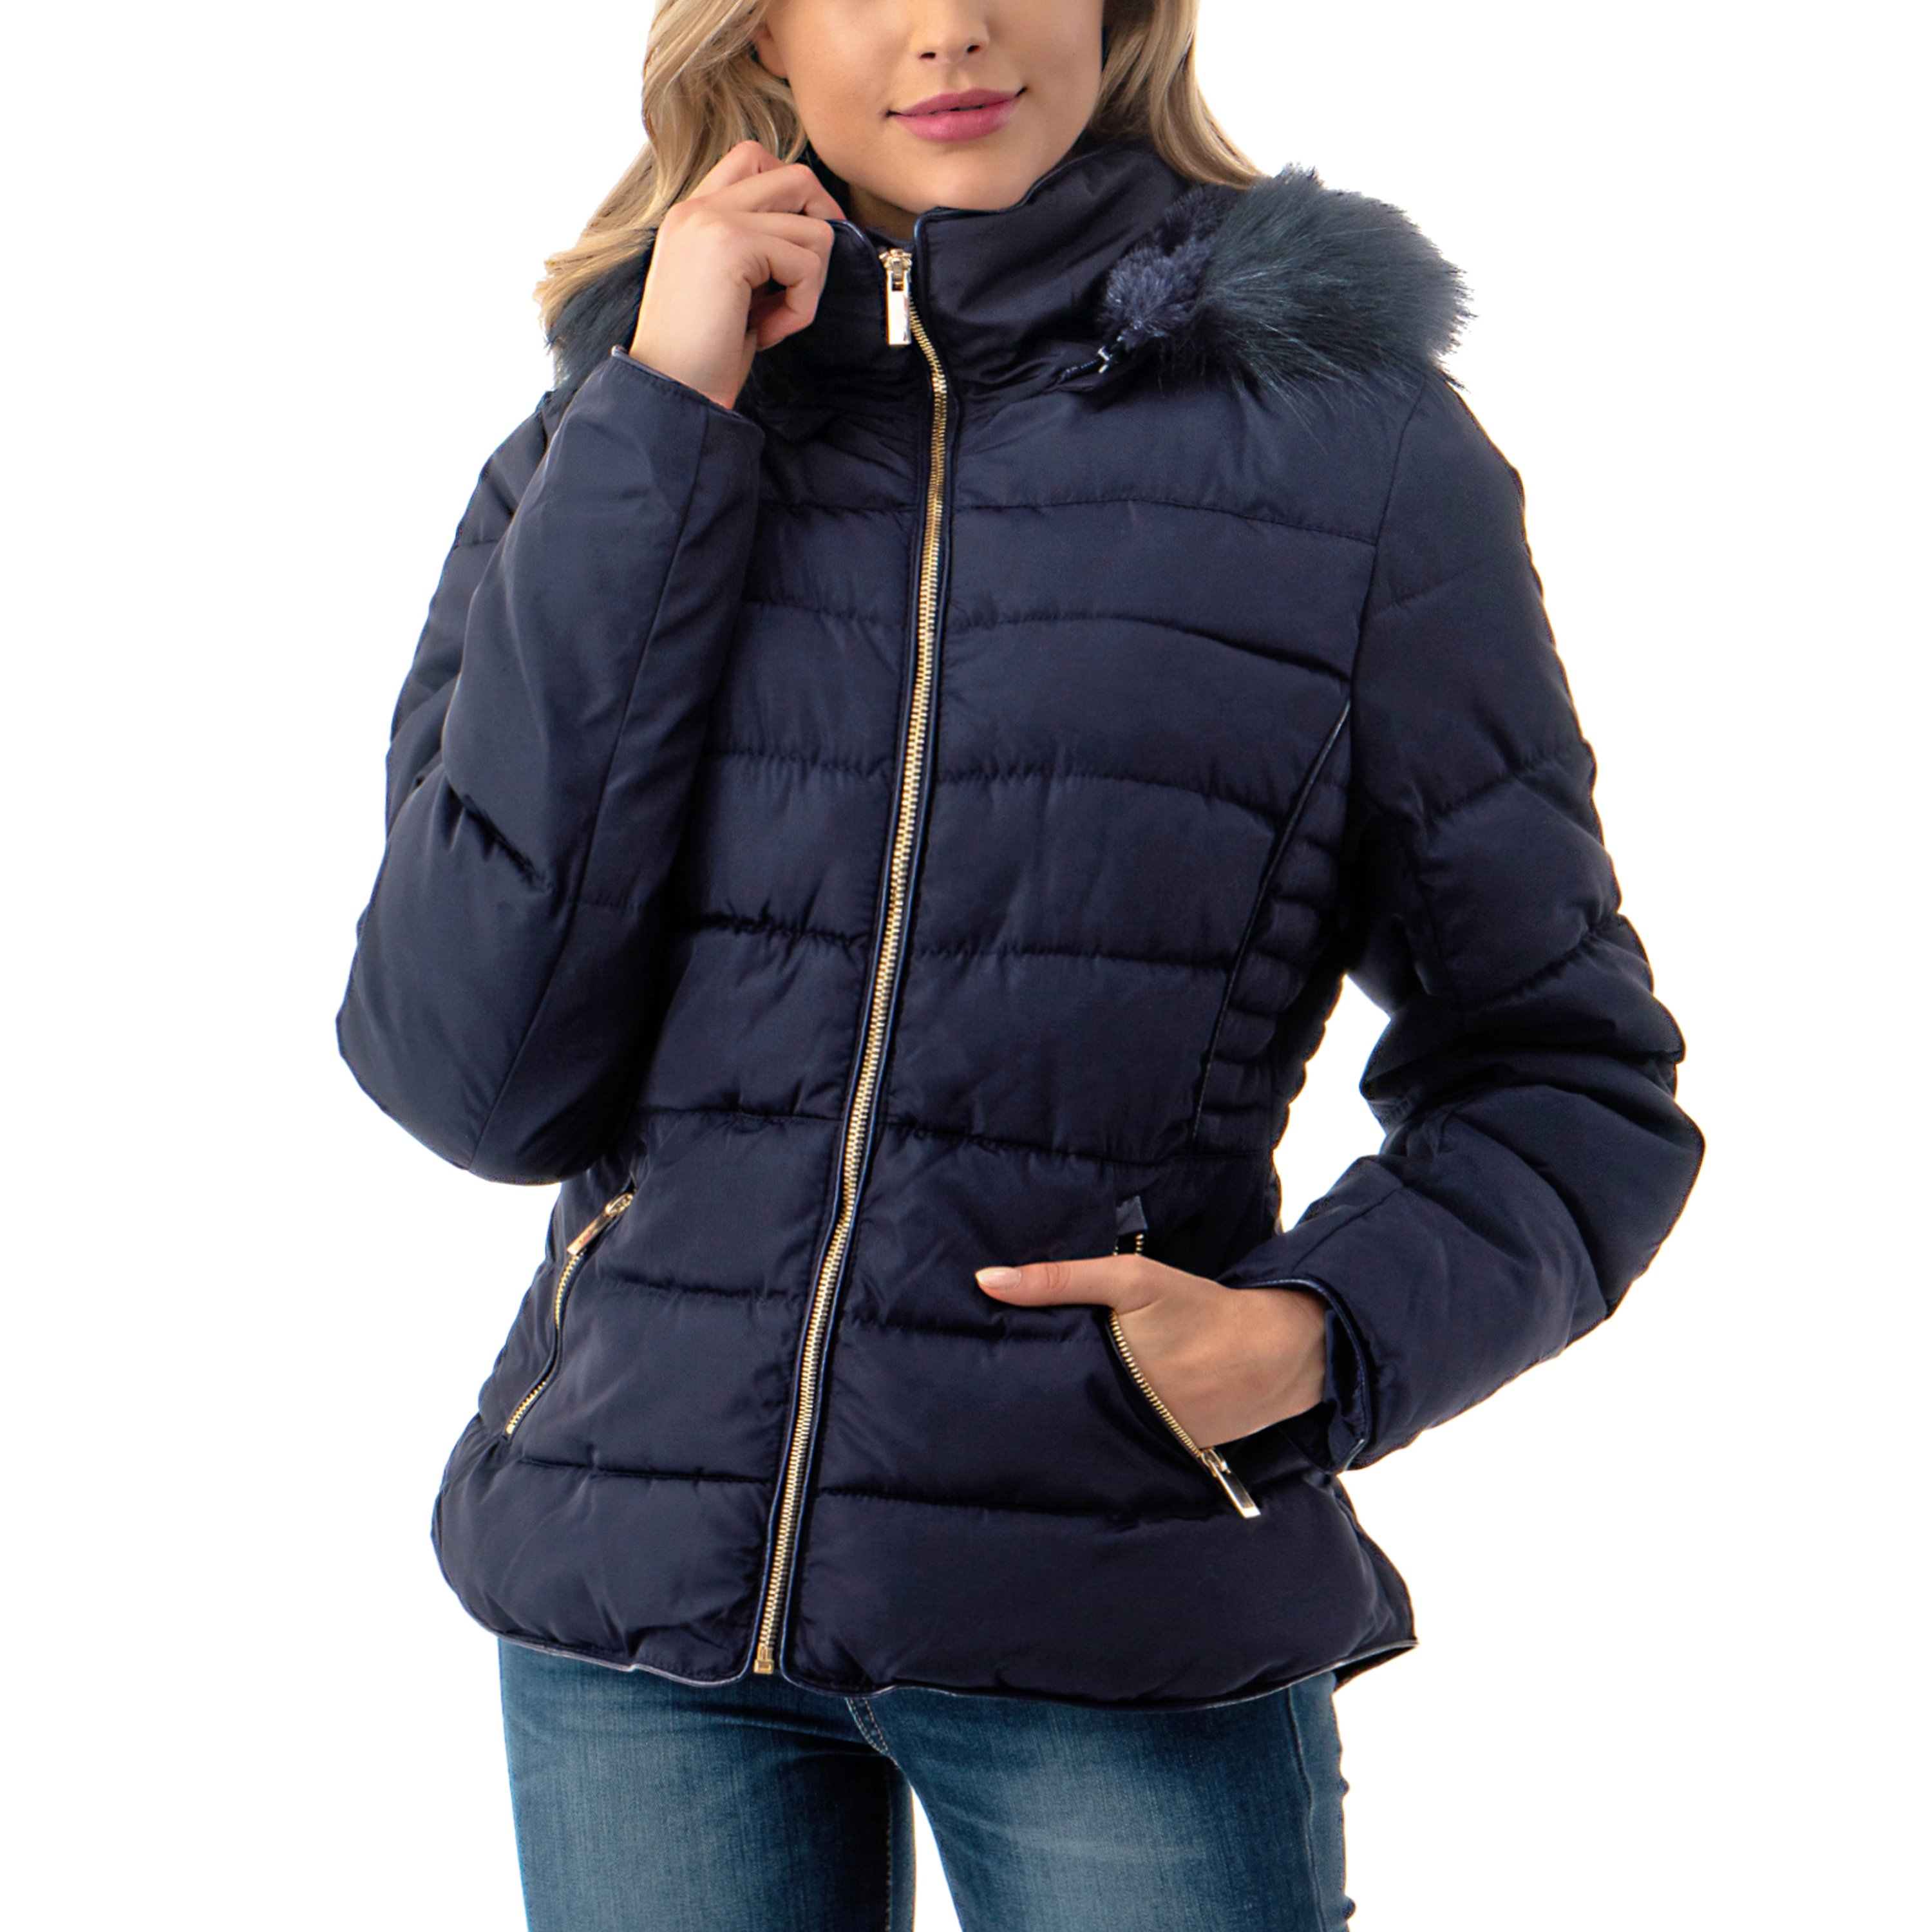 Fashionazzle Women's Short Puffer Coat with Removable Faux Fur Trim Hood Jacket - image 1 of 14